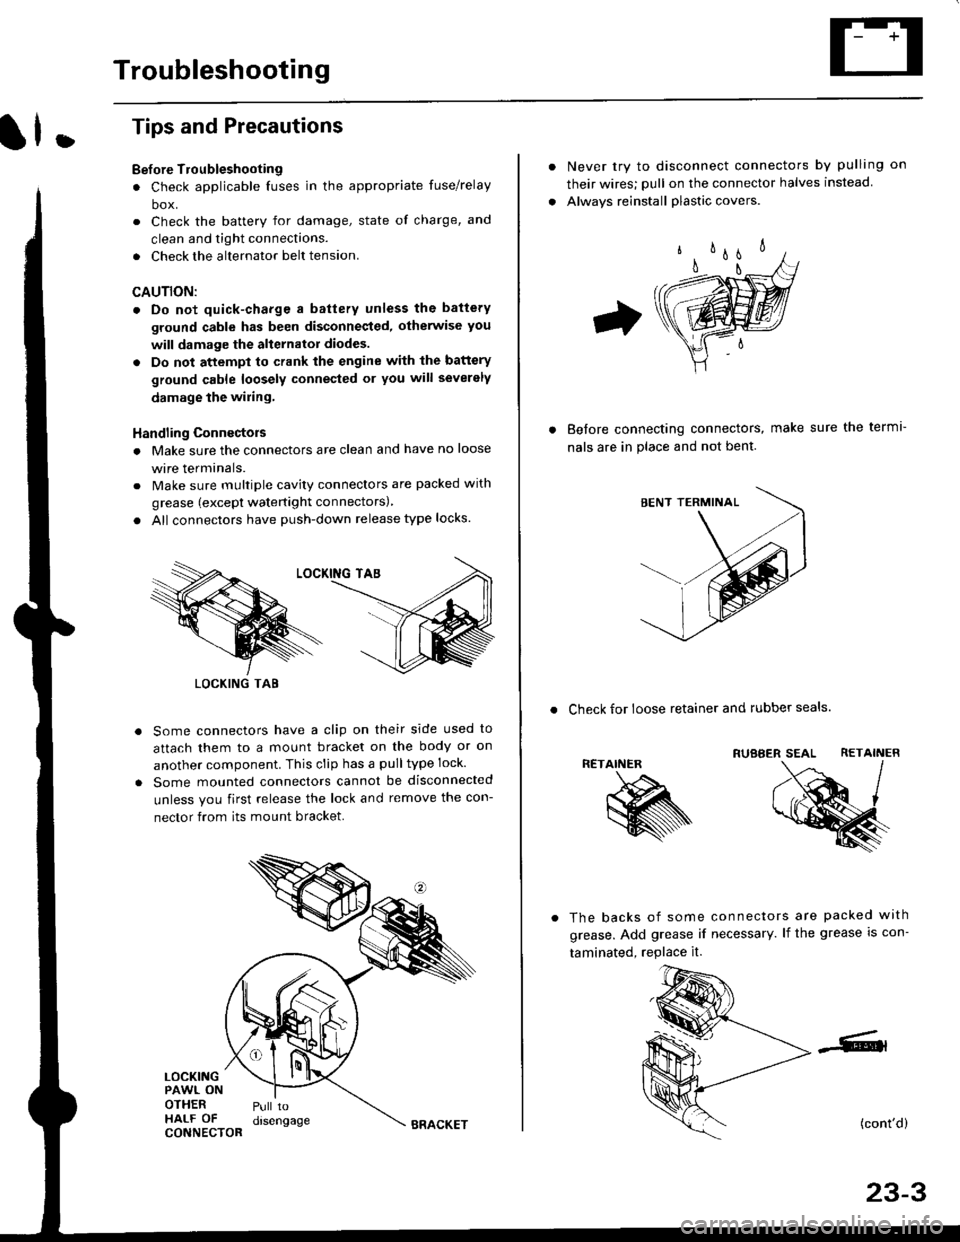 HONDA CIVIC 1999 6.G Workshop Manual Troubleshooting
ll.
Tips and Precautions
Bef ore Troubleshooting
. Check applicable fuses in the appropriate fuse/relay
box.
. Check the battery for damage, state of charge, and
clean and tight connec